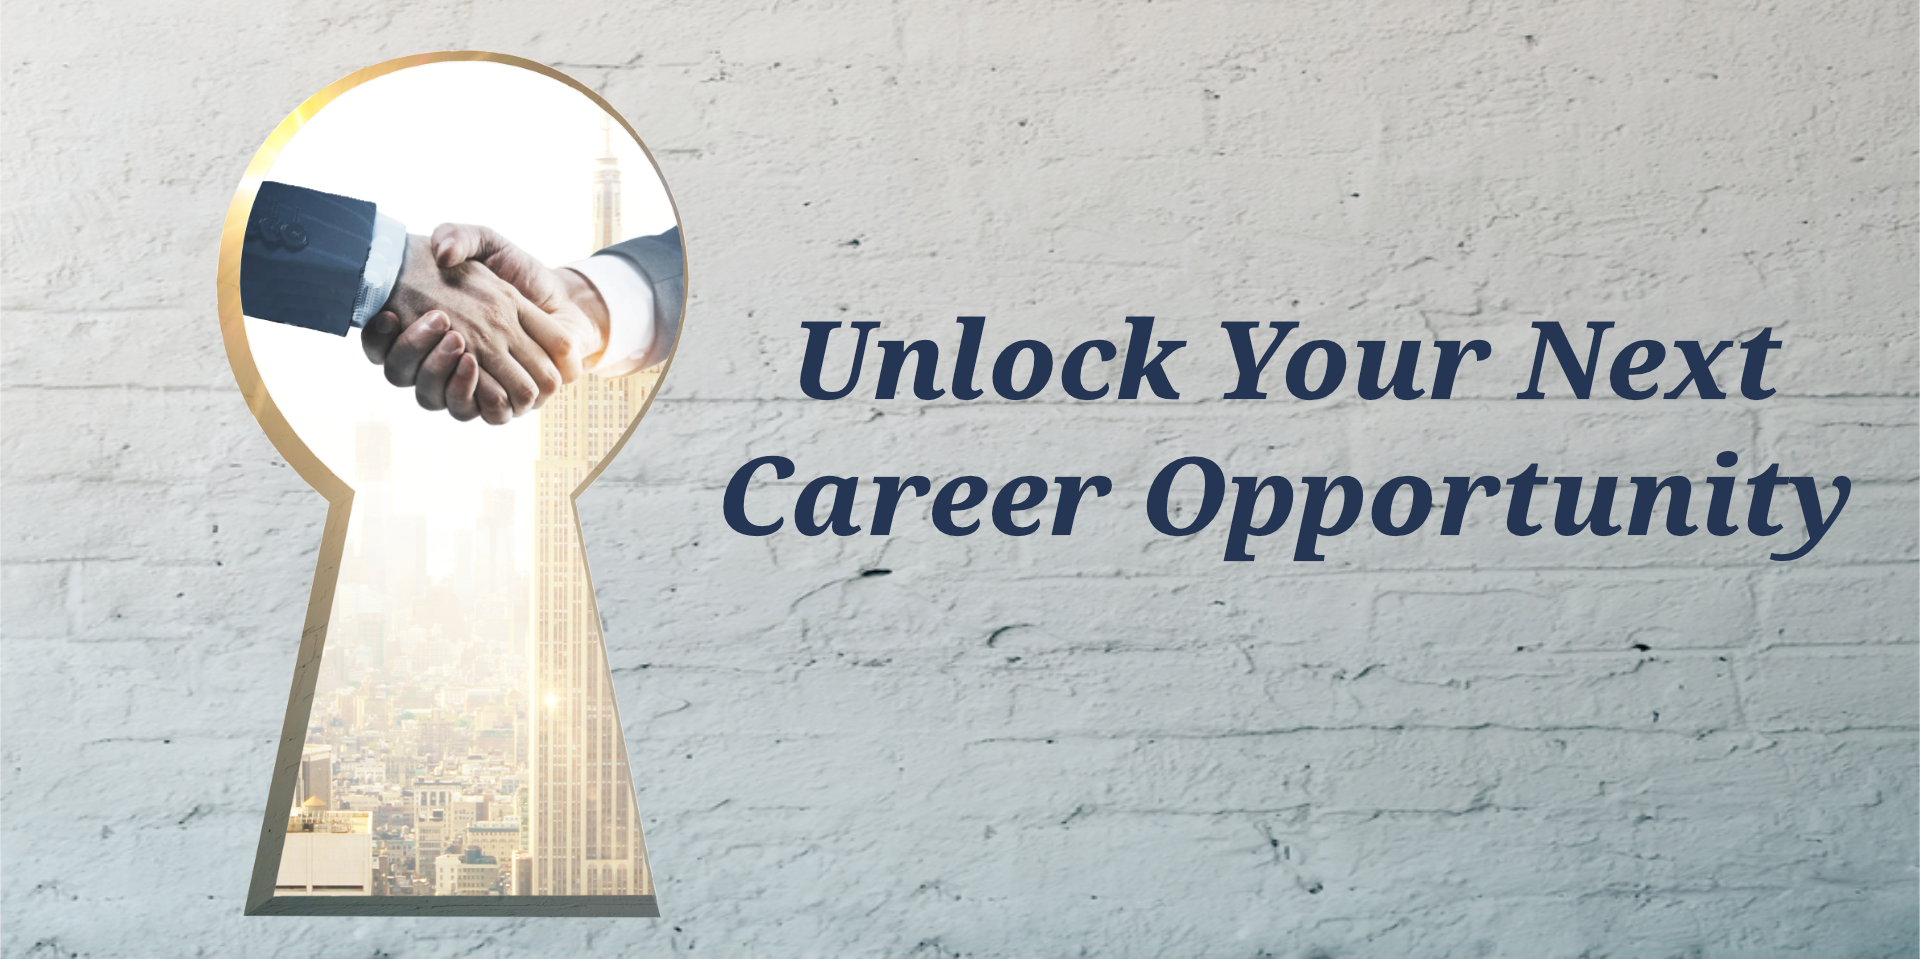 Unlock your next career opportunity